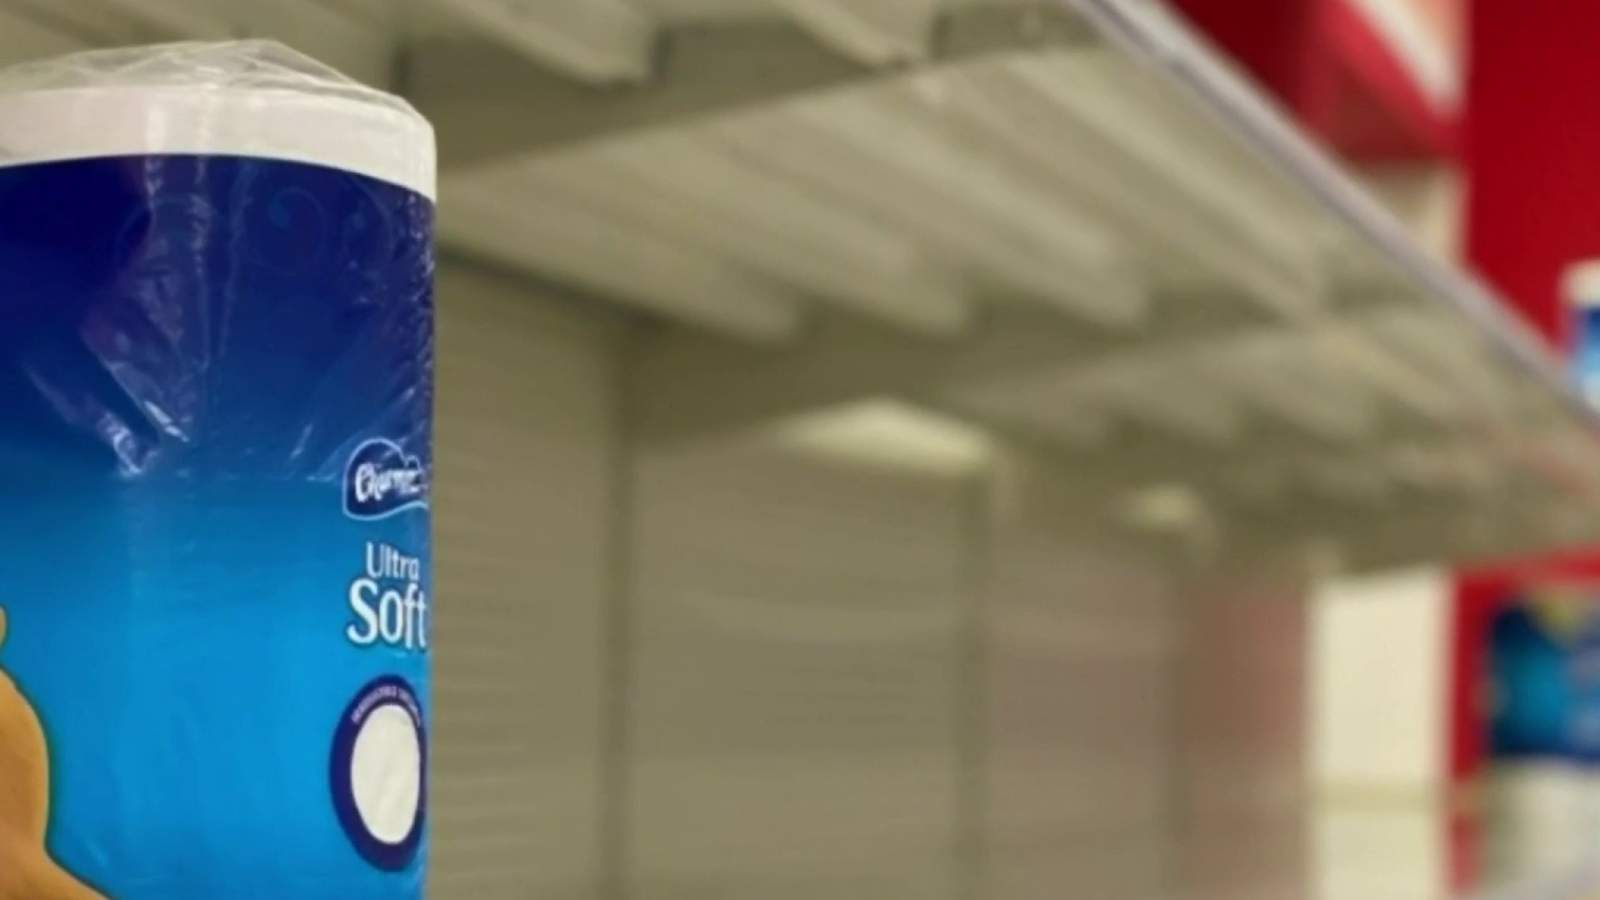 Officials: Don’t panic buy toilet paper, paper towel or other items because it causes a ripple effect in the supply chain